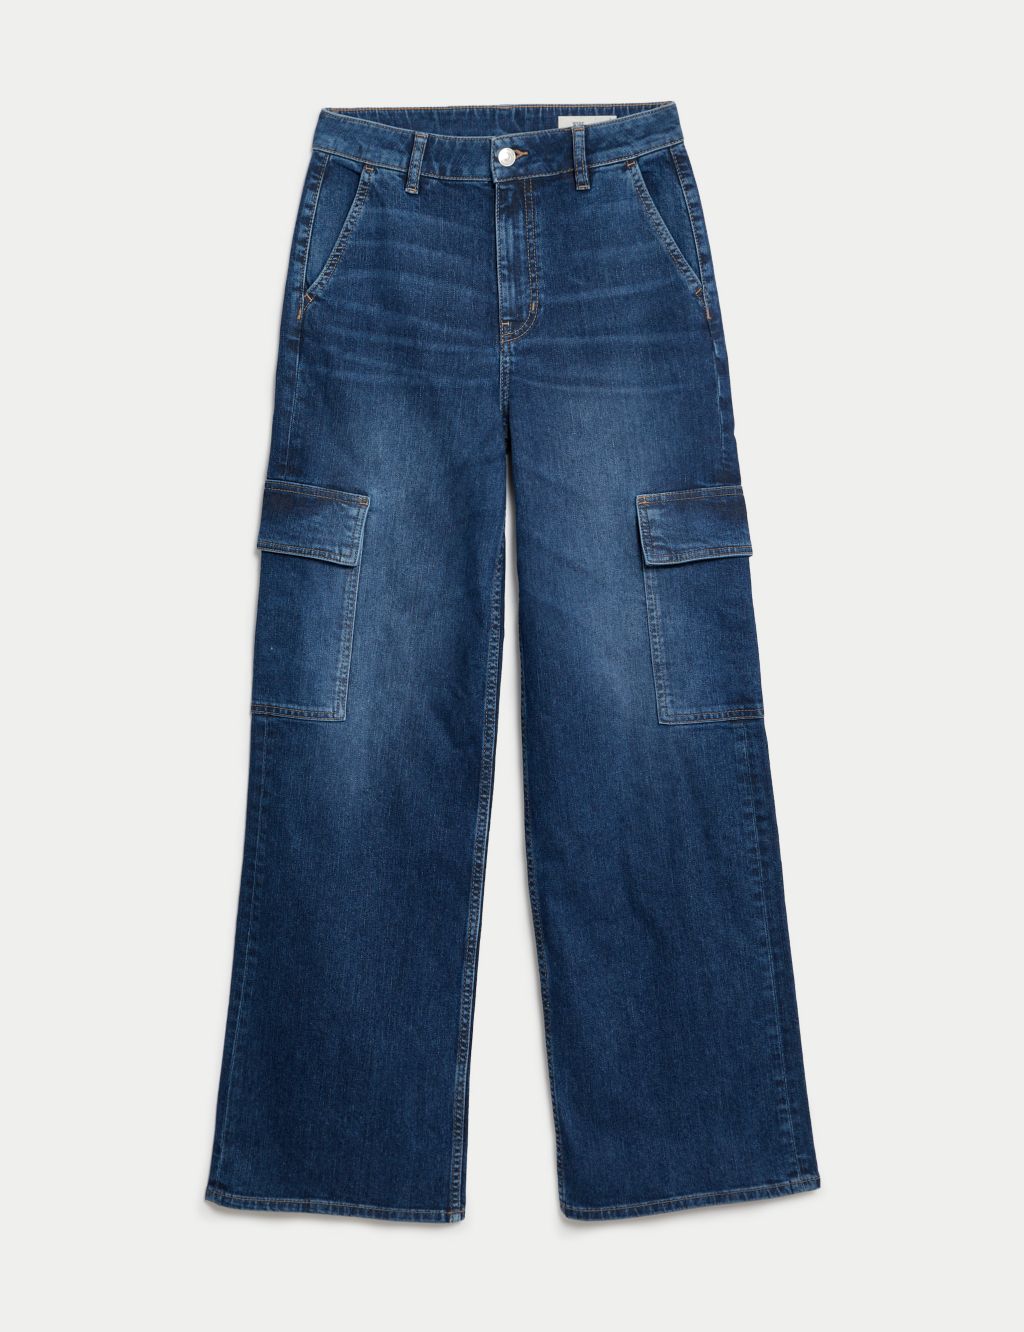 High Waisted Wide Leg Cargo Jeans image 2